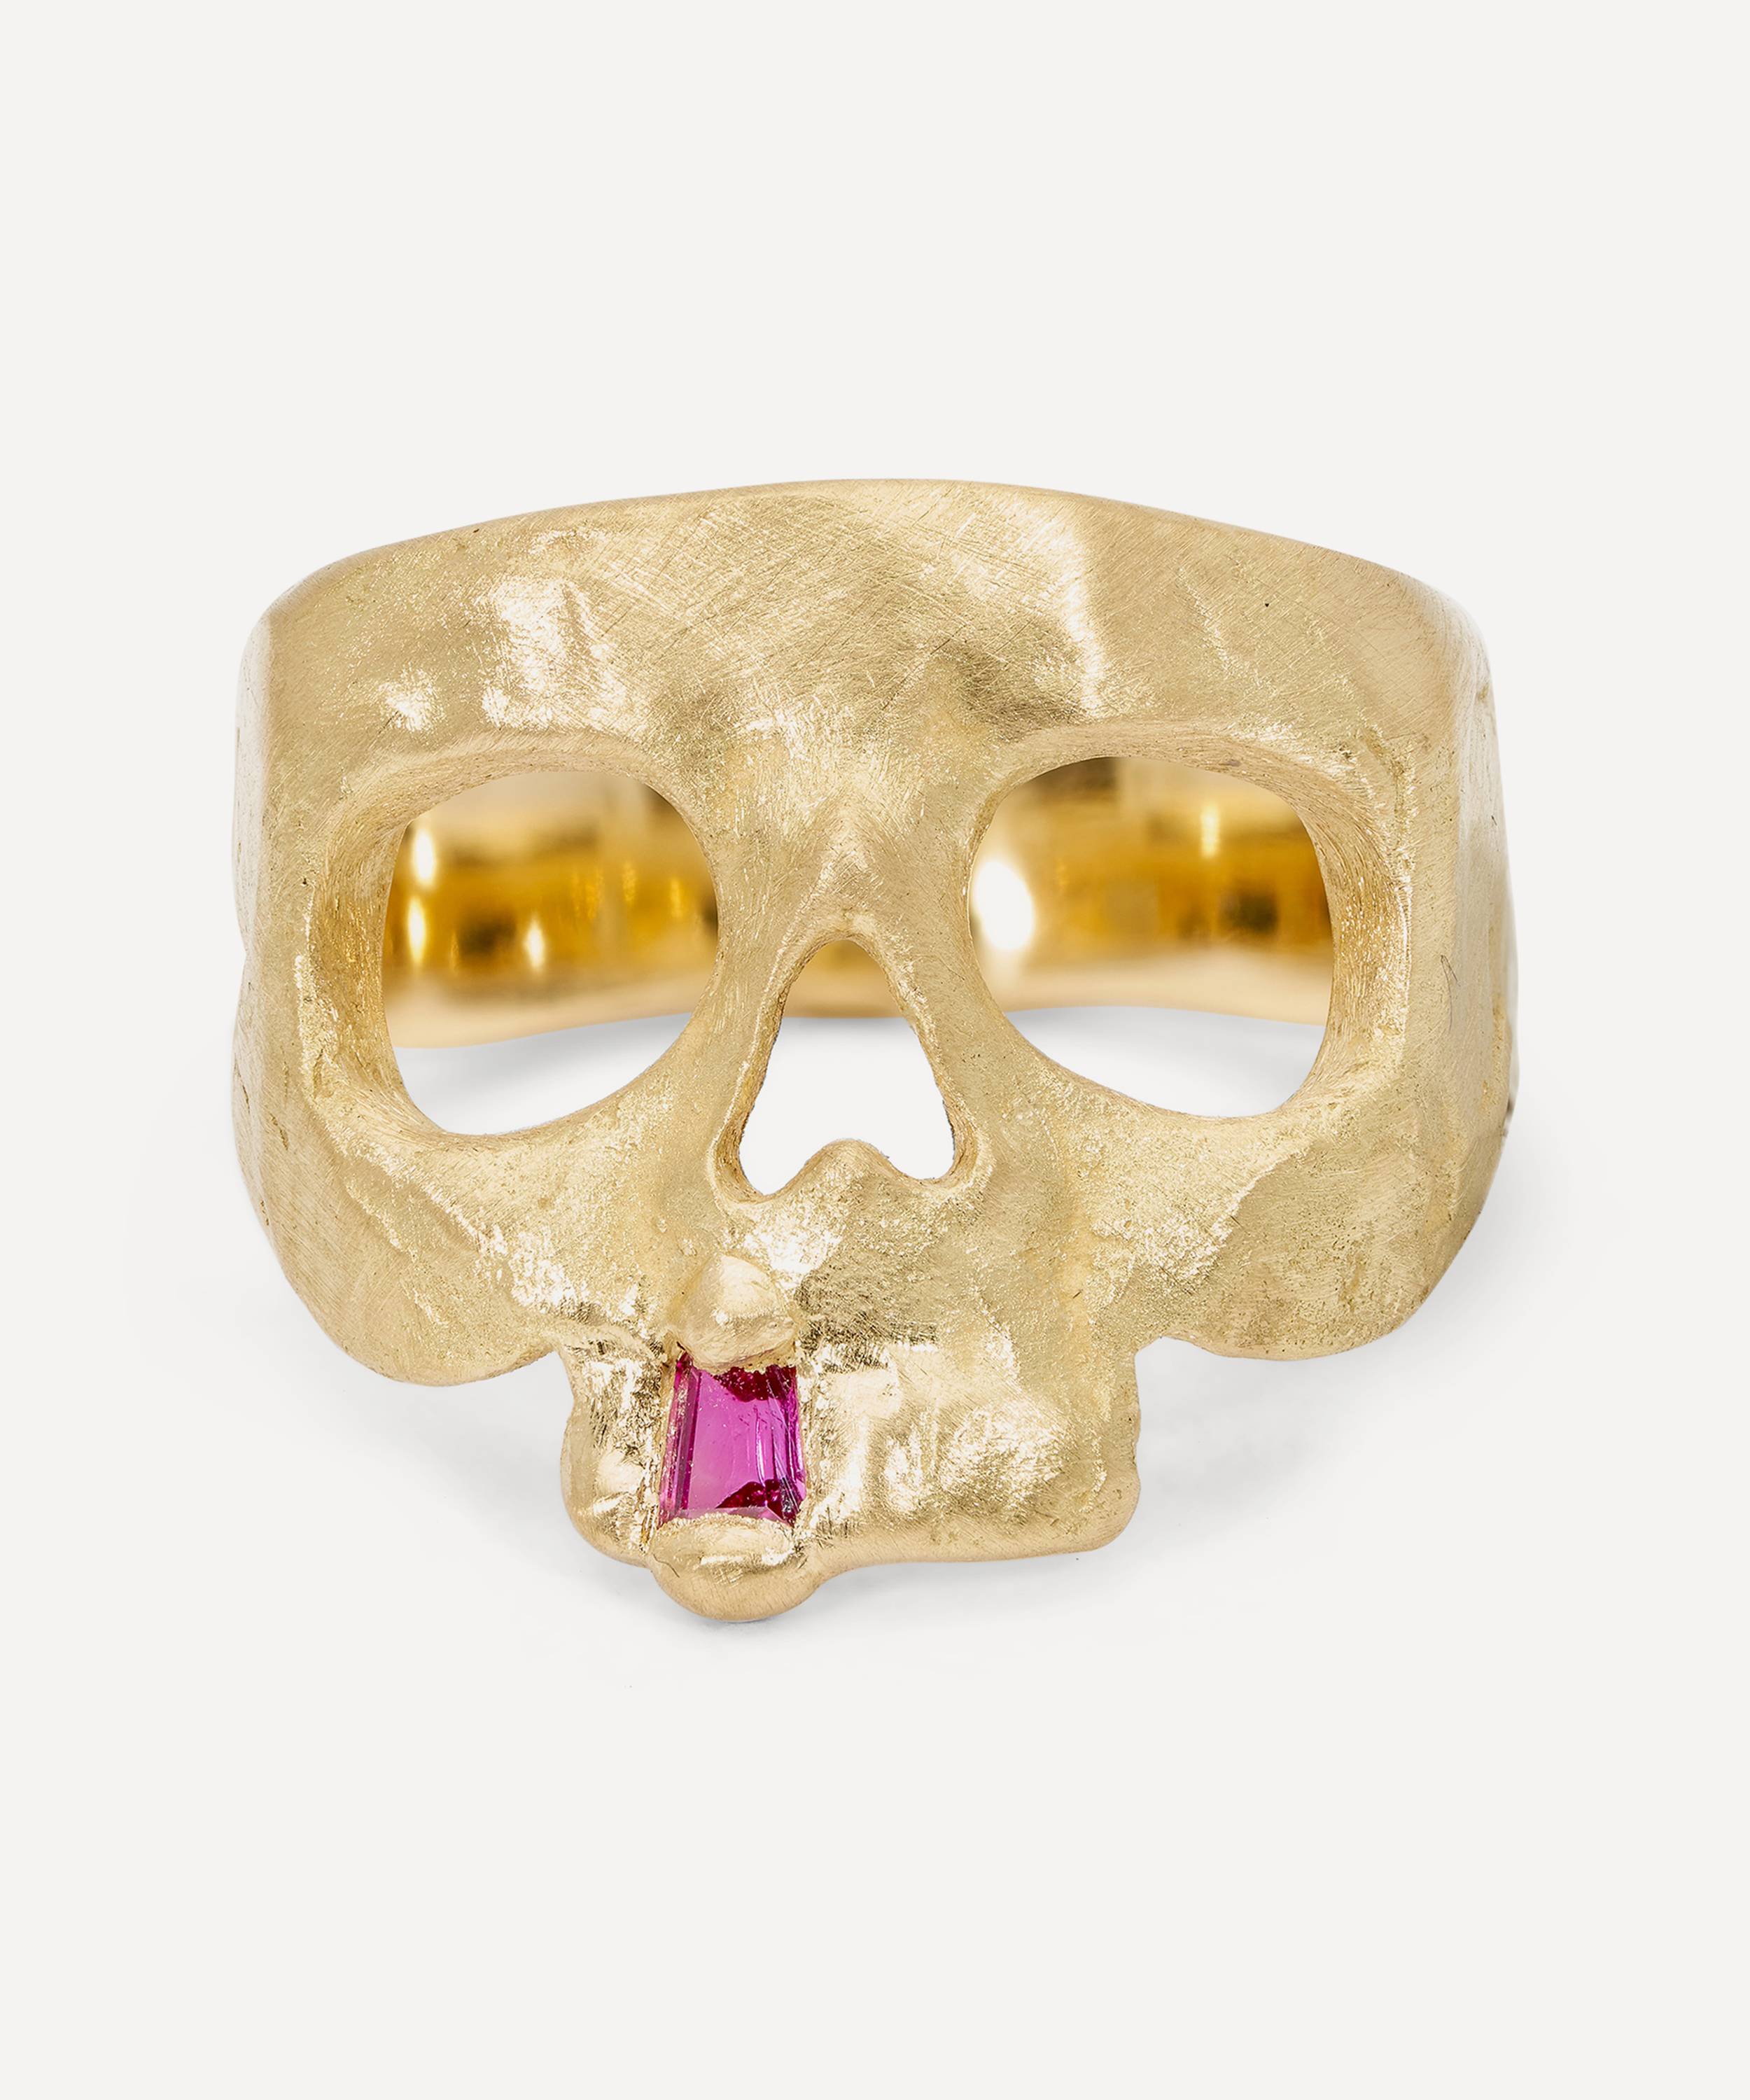 Polly Wales 18ct Gold Snaggletooth Skull Pinky Ring | Liberty